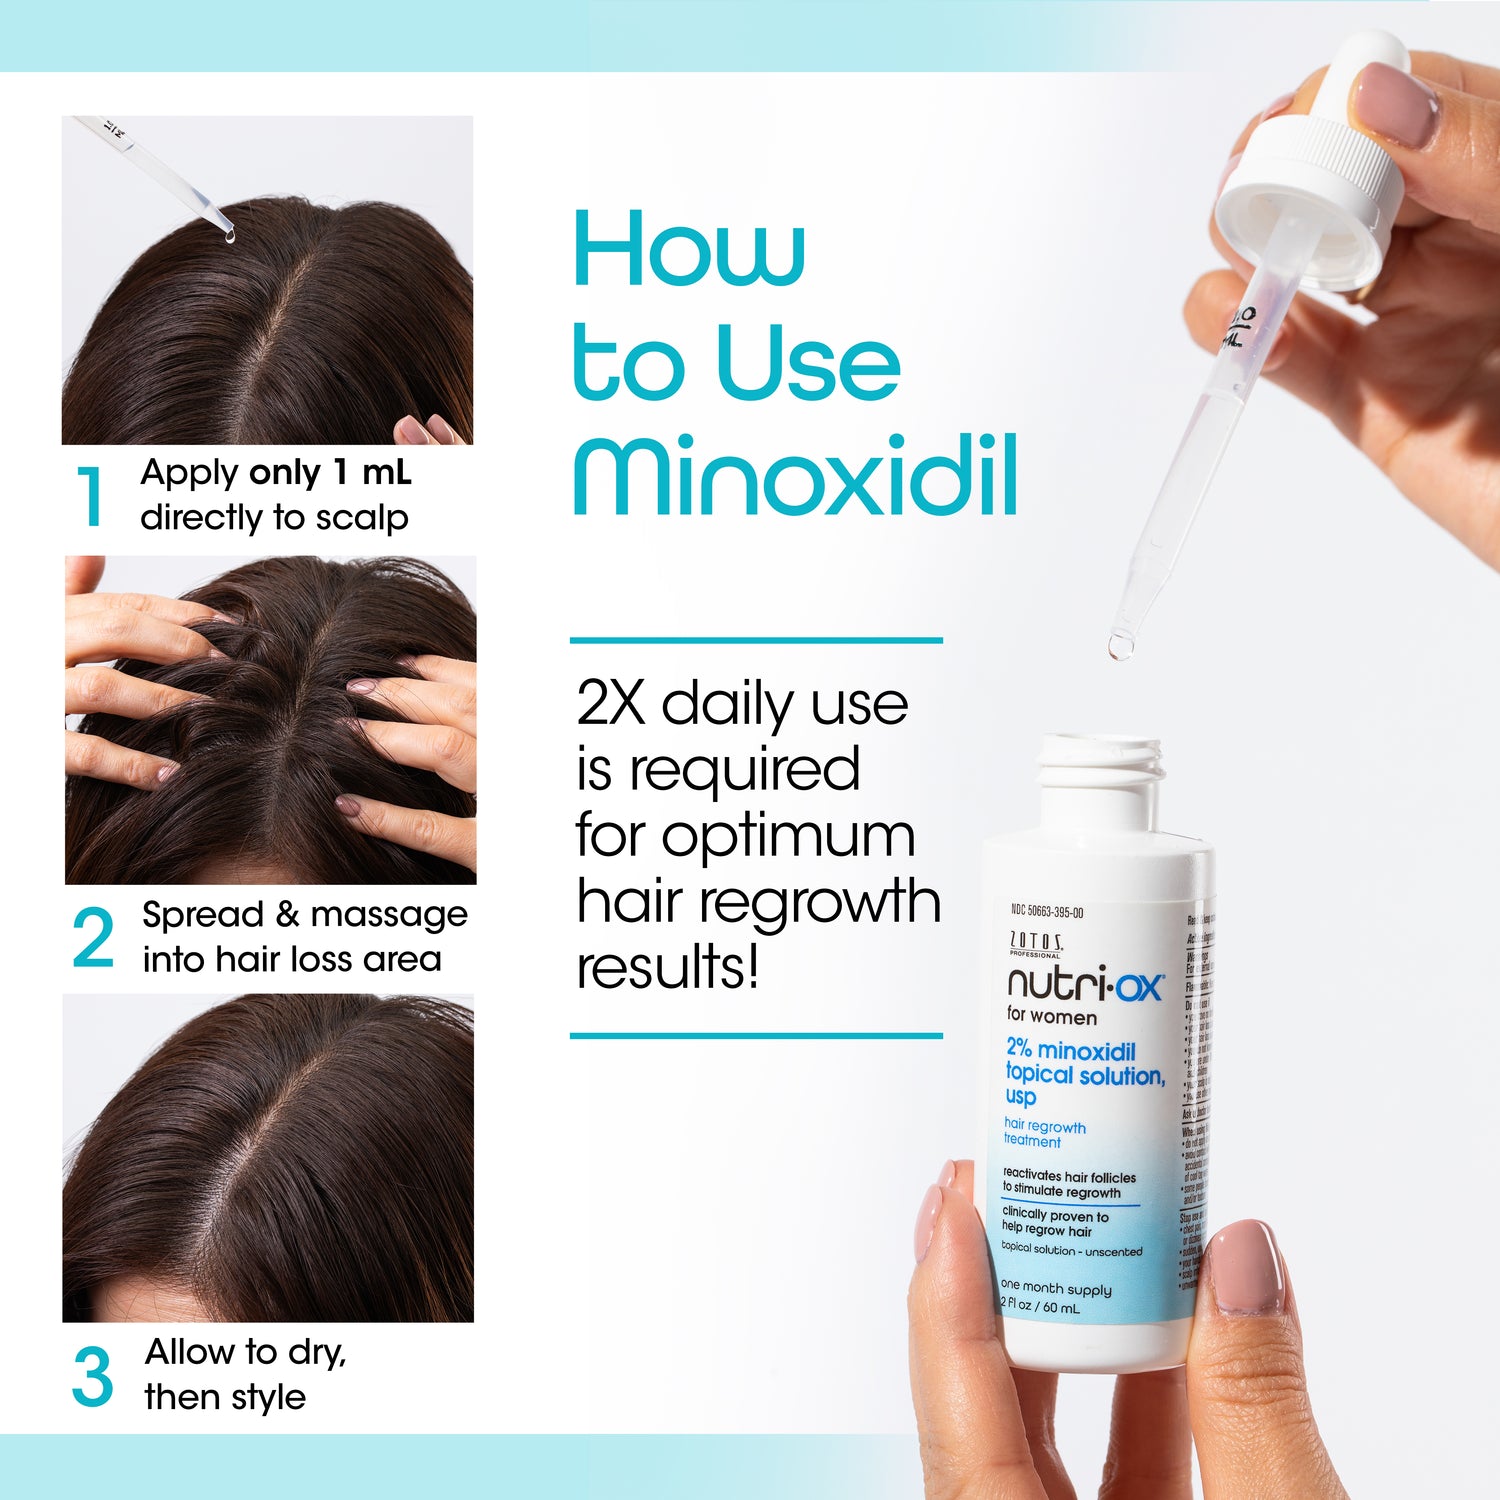 How to use Minoxidil: Step 1: Apply only 1 mL directly to scalp. Step 2: Spread and massage into hair loss area. Step 3: Allow to dry, then style. 2X daily use is required for optimum hair regrowth results. 